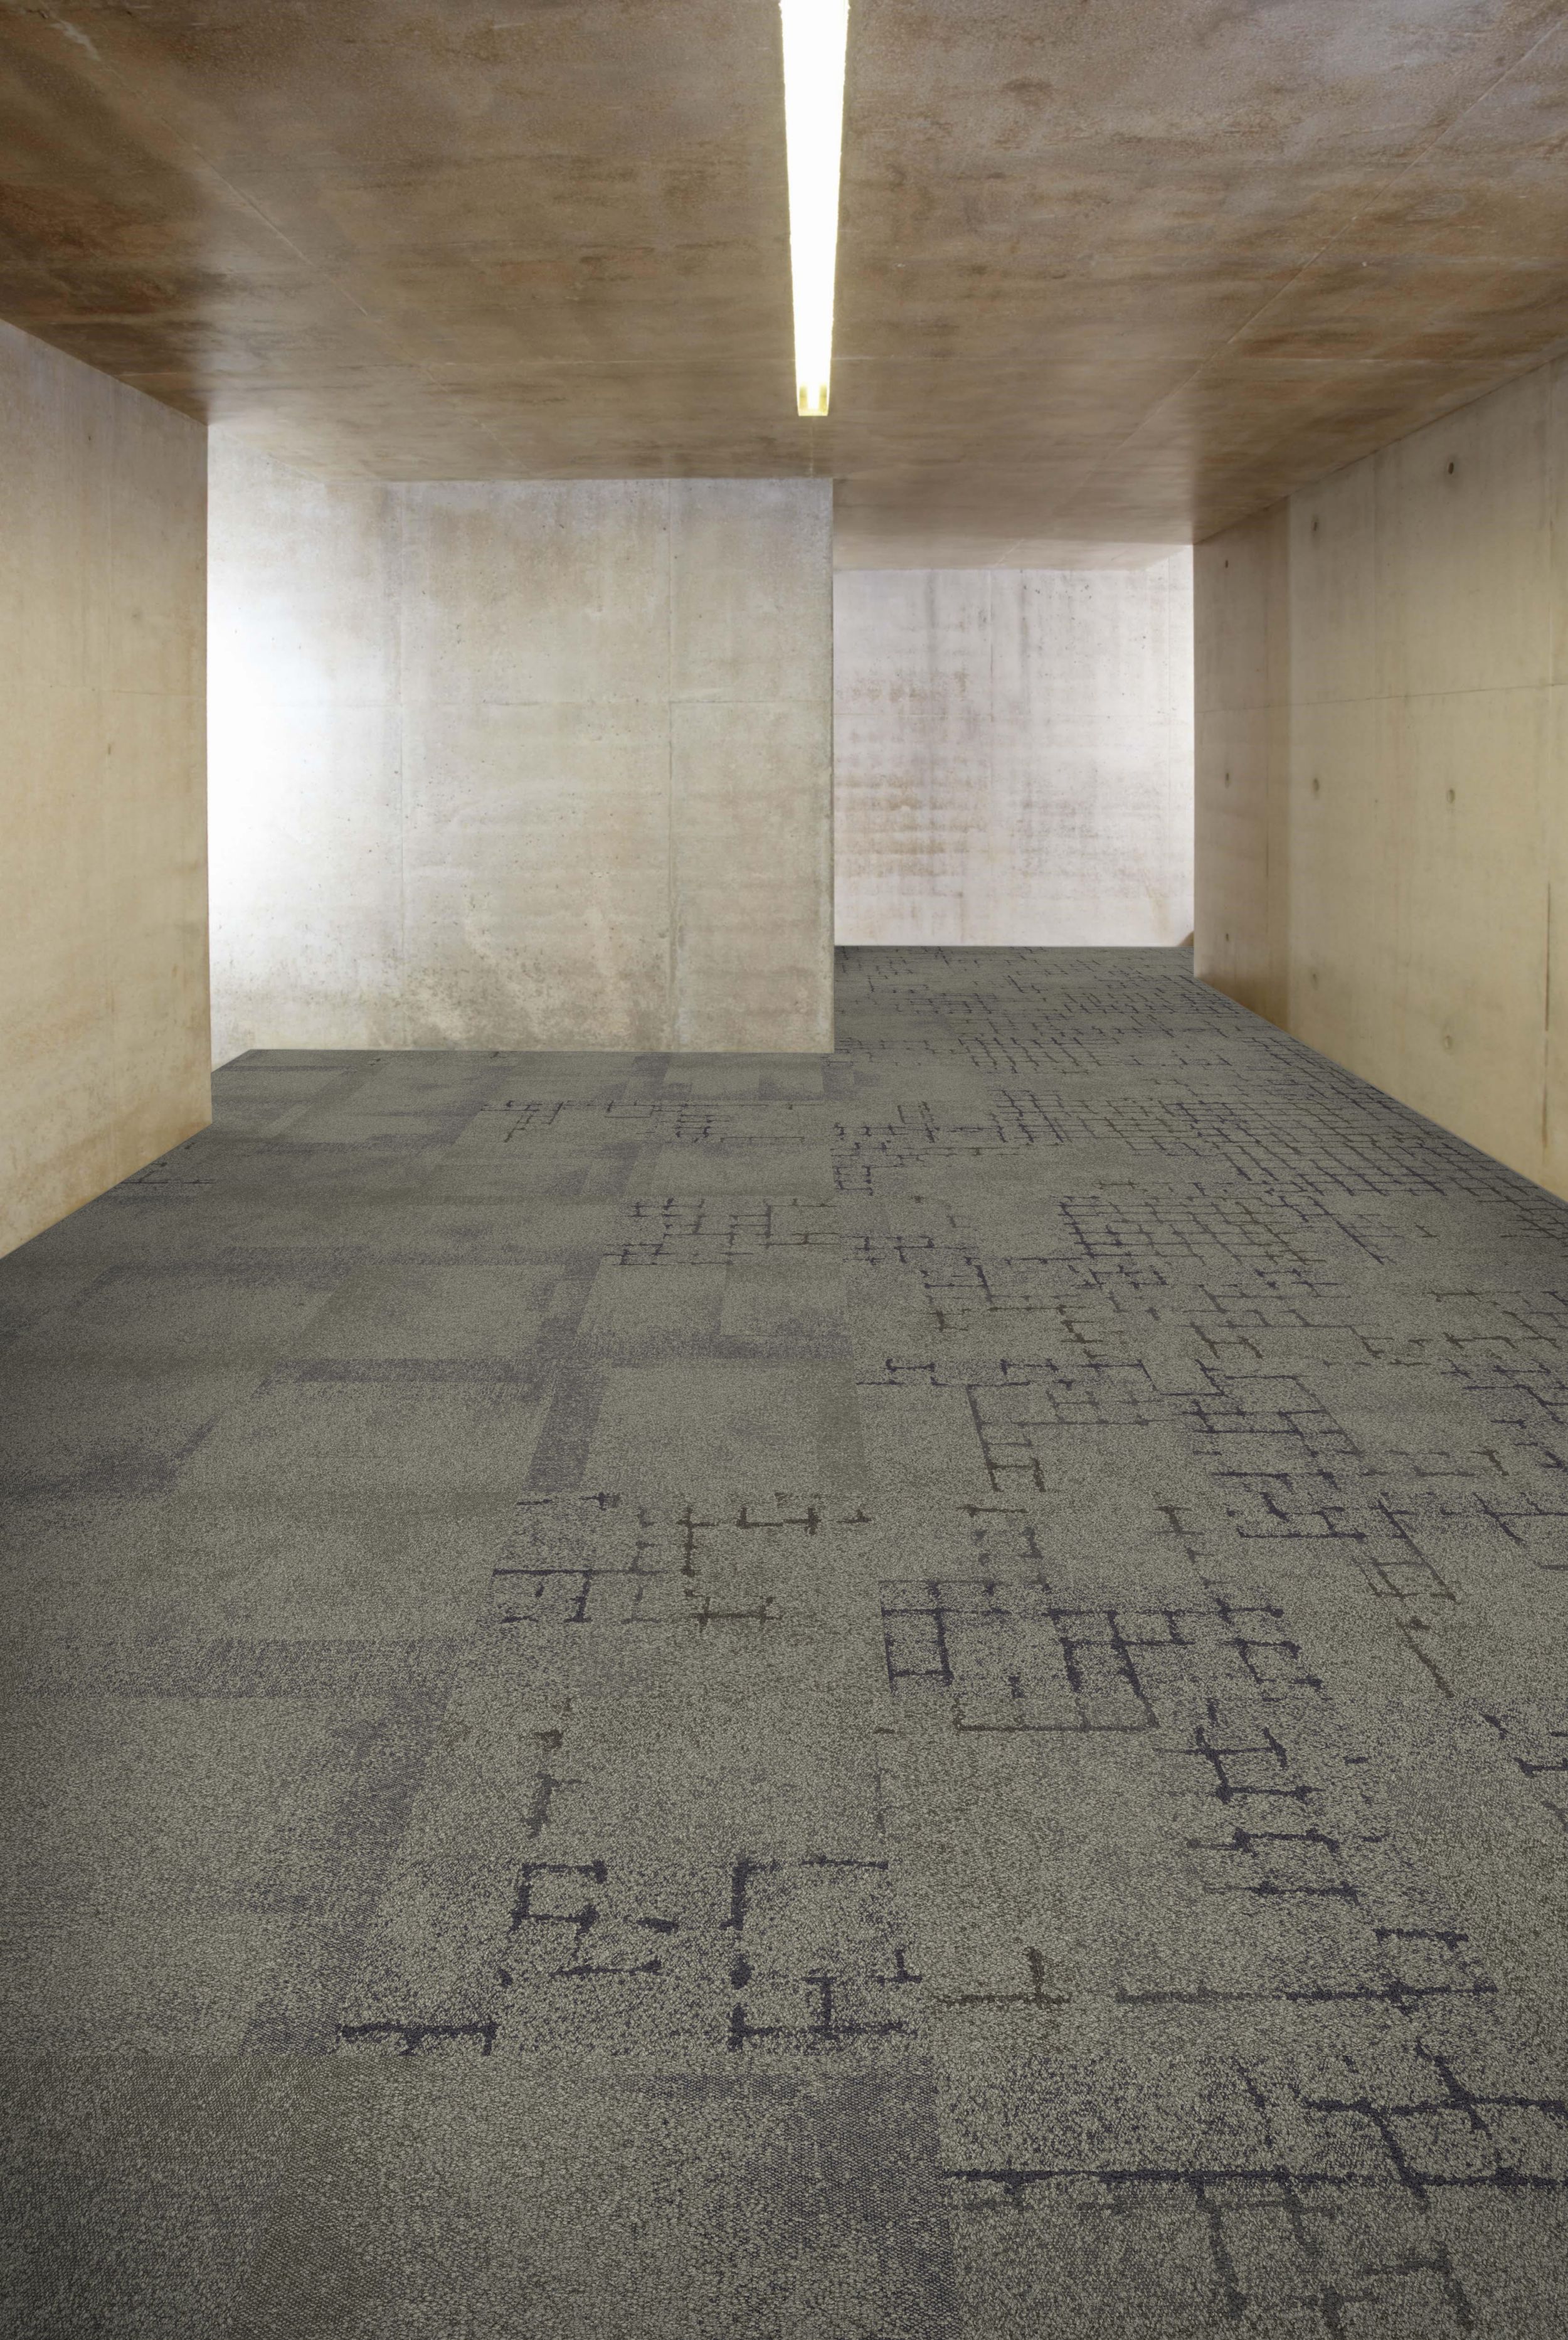 image Interface Flagstone, Kerbstone and Sett in Stone carpet tile in corridor with concrete walls and ceiling numéro 5